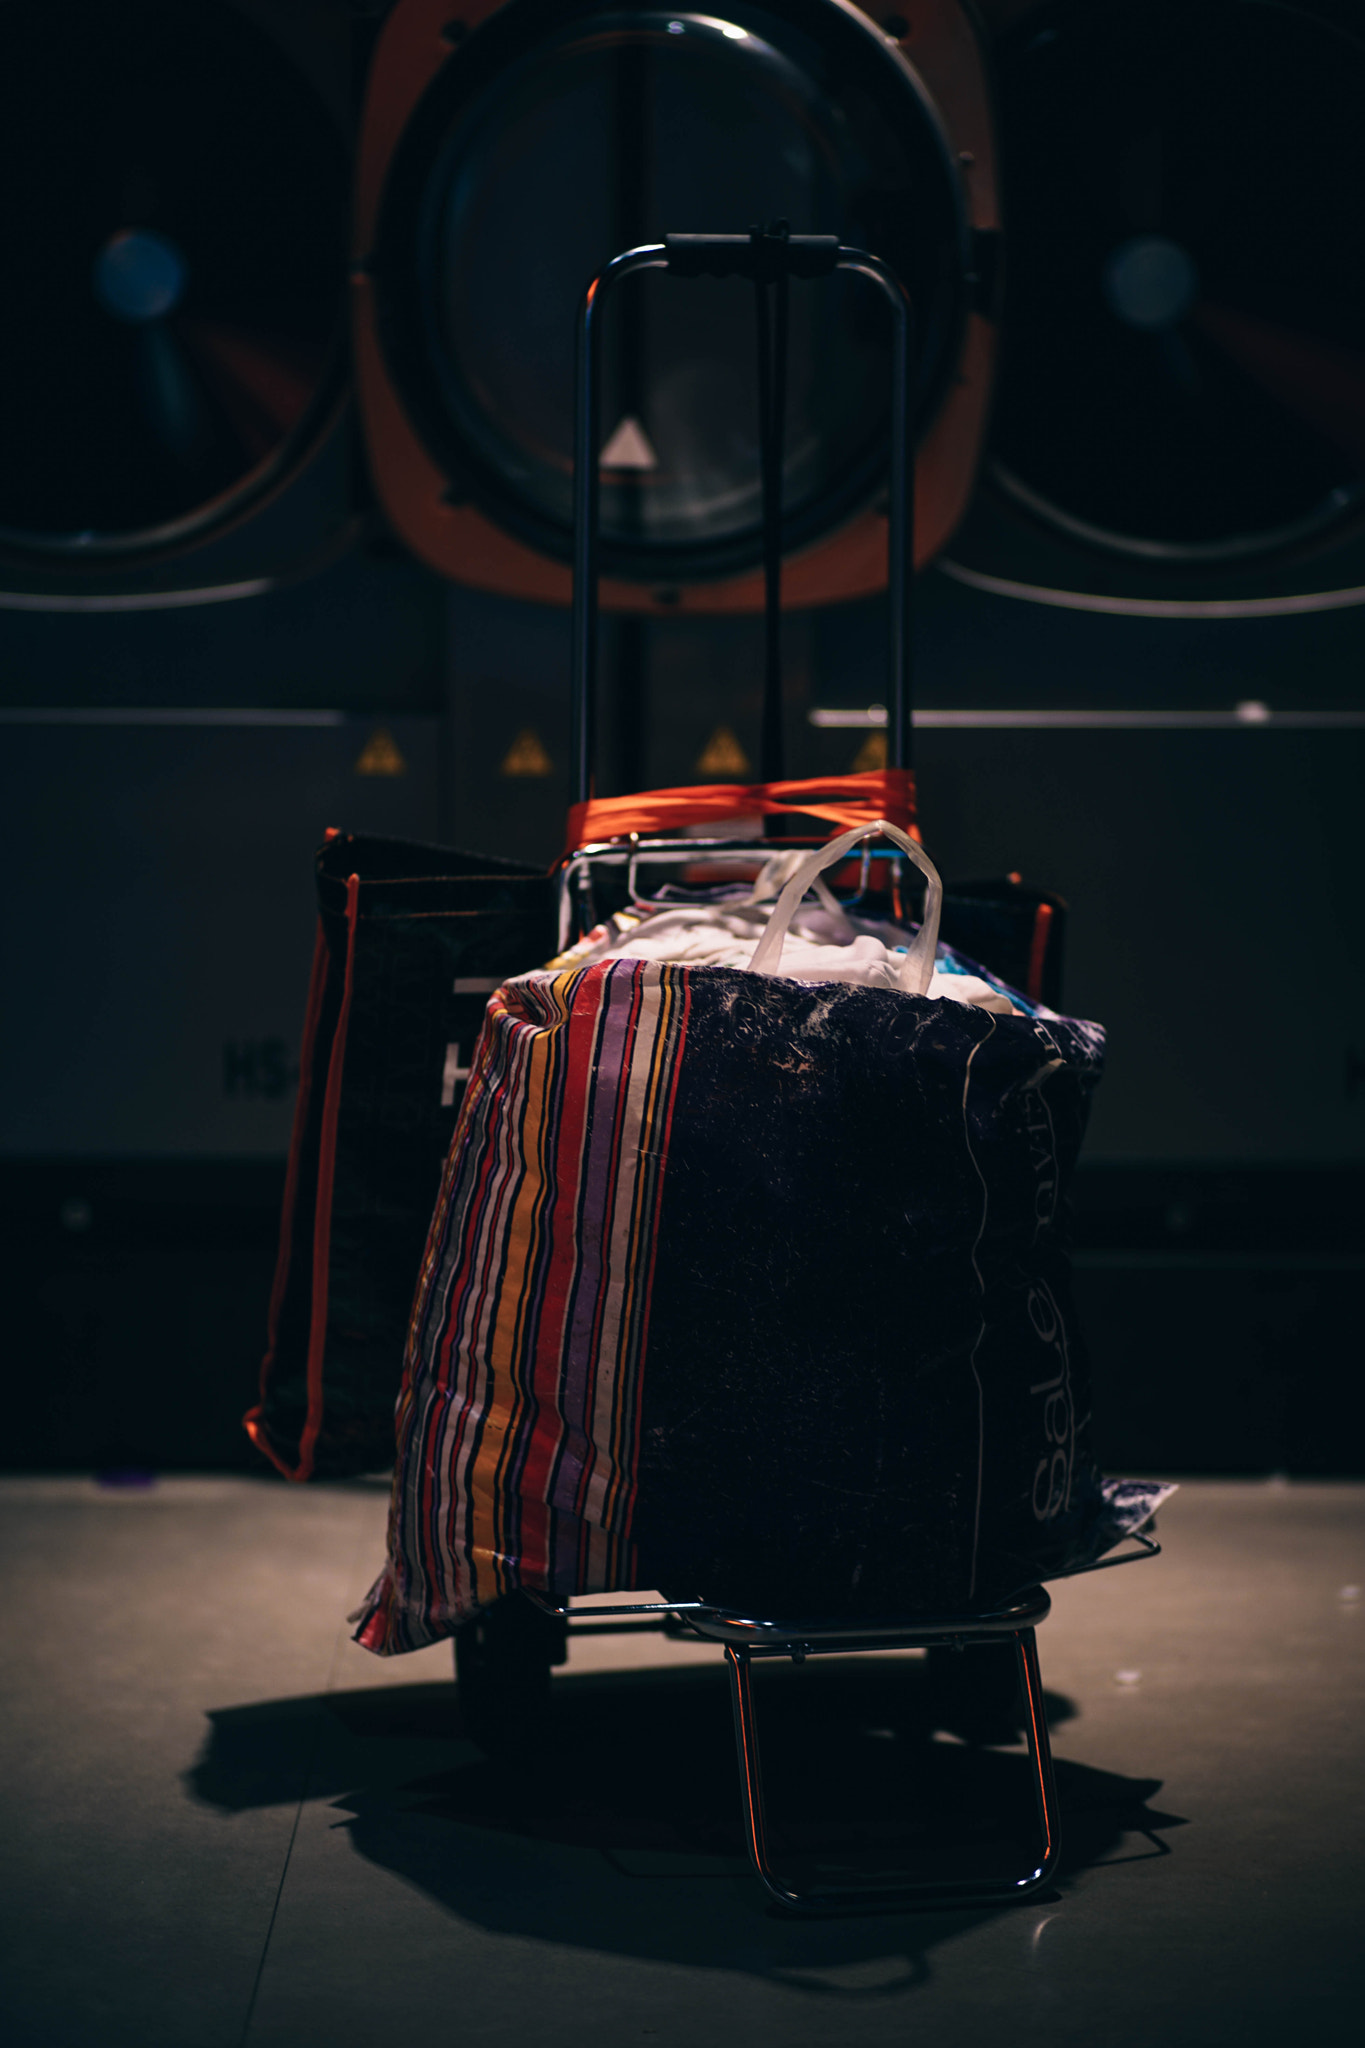 Sony a7 II + DT 85mm F1.8 SAM sample photo. Laundry day photography